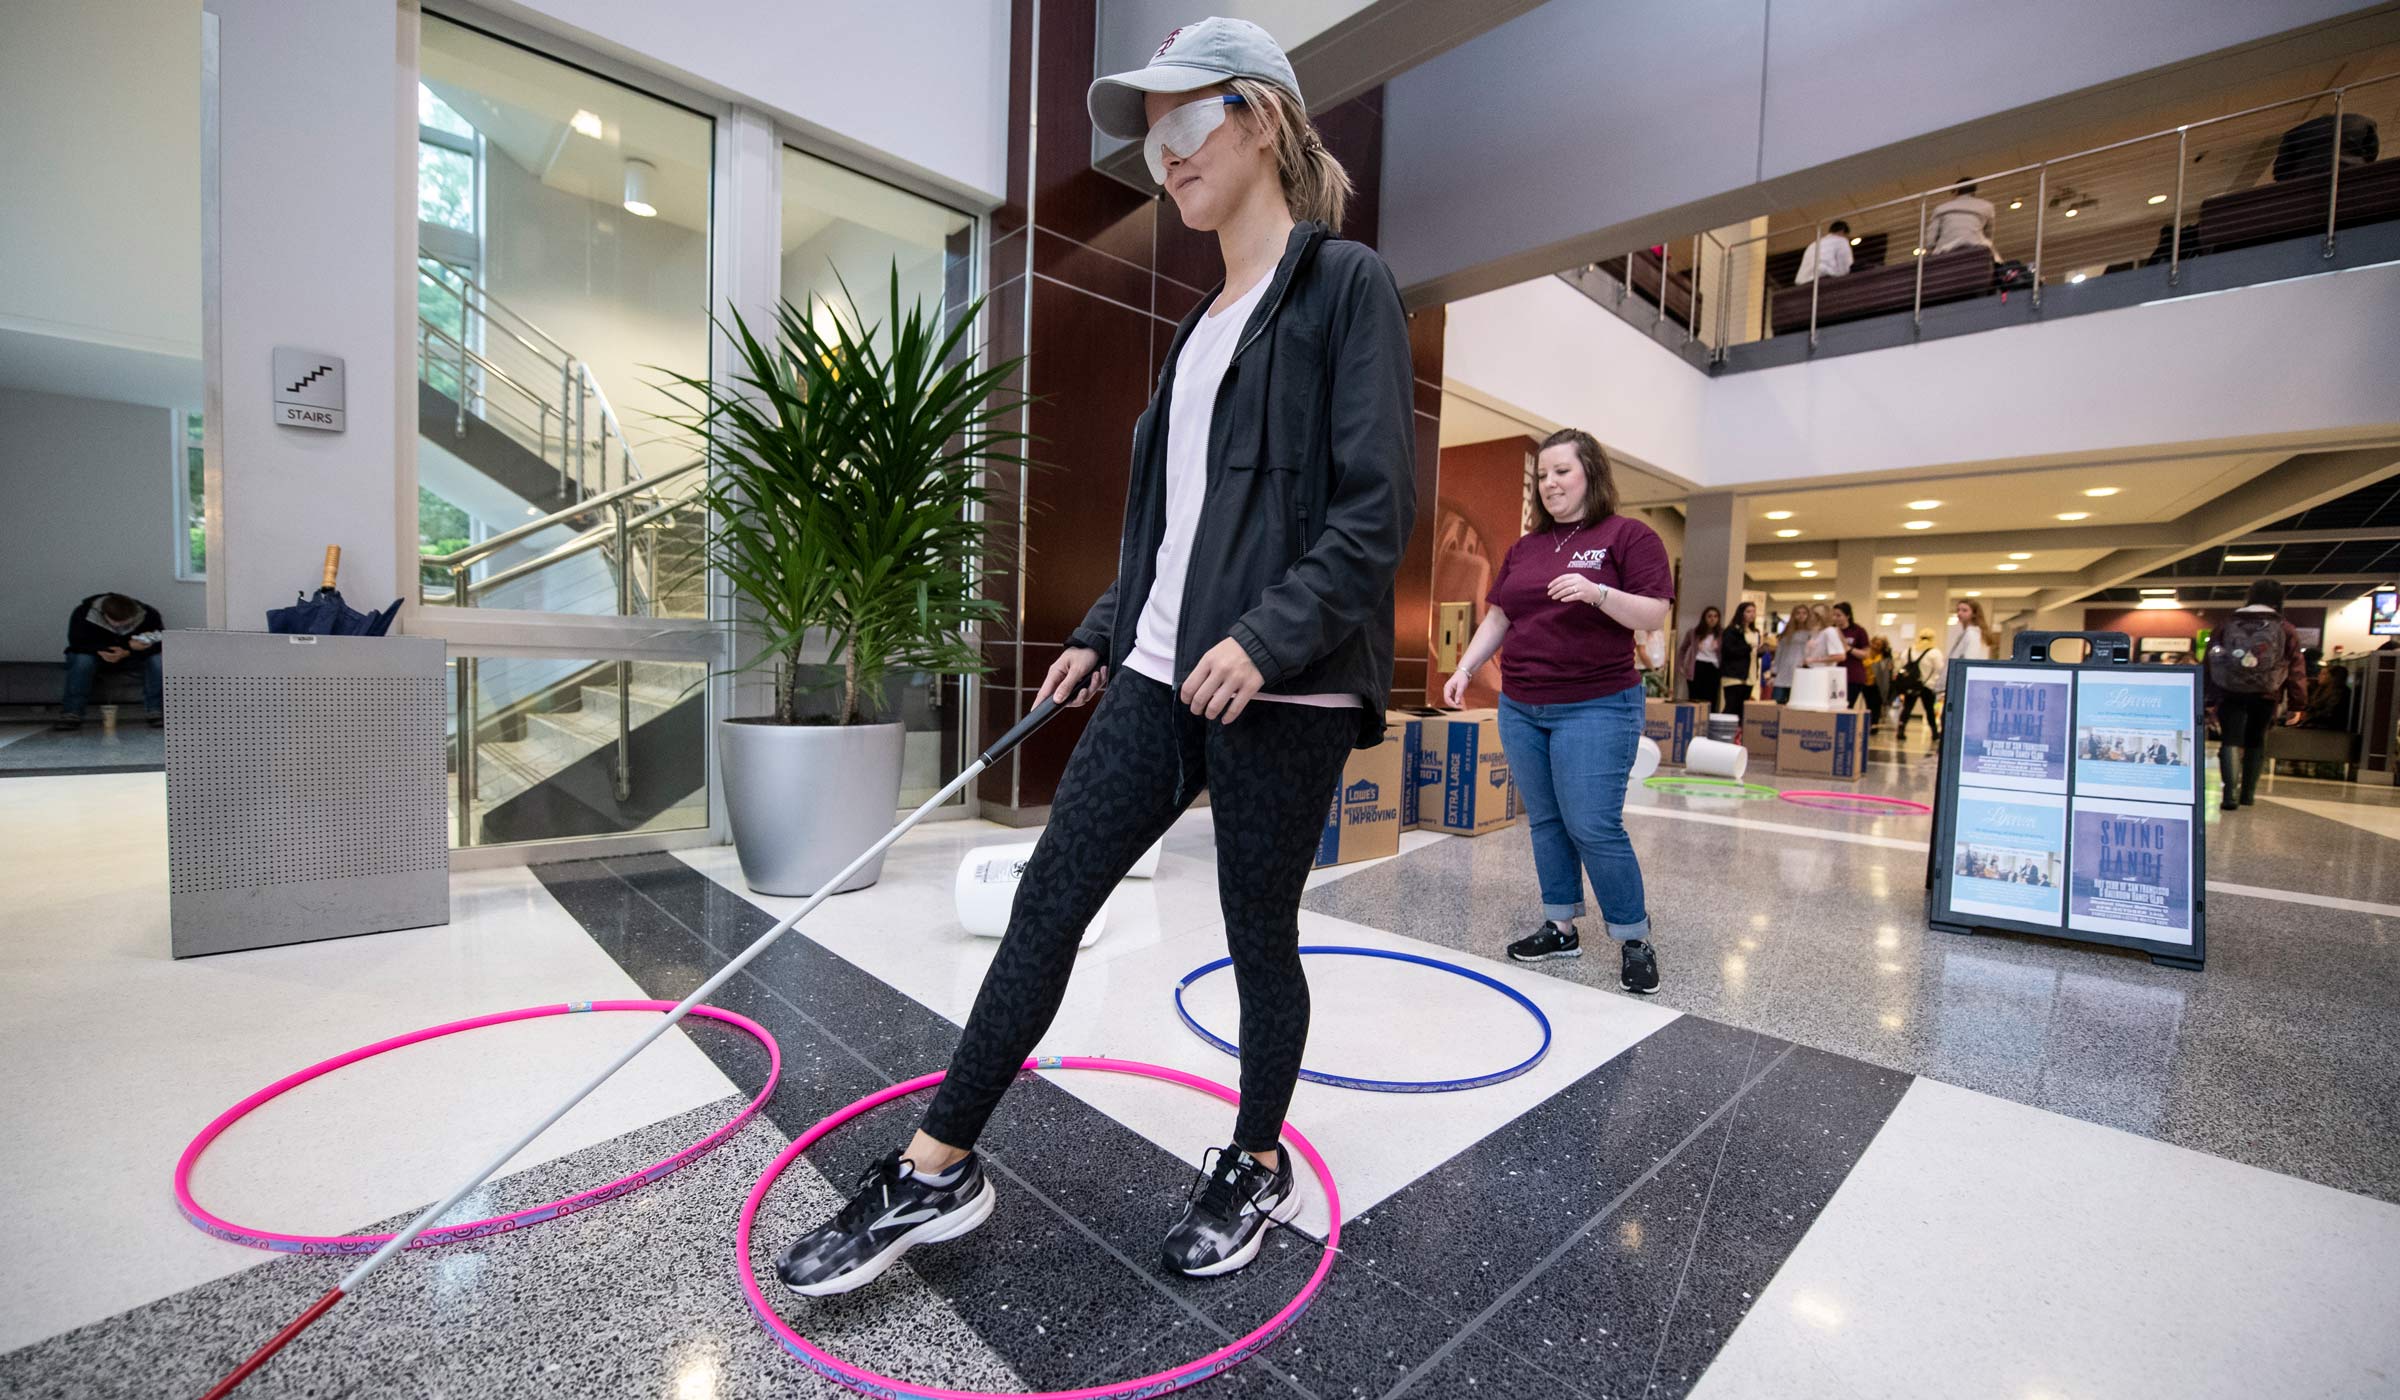 Junior Laura Isom participates in an obstacle course during white cane awareness day at the colvard student union.